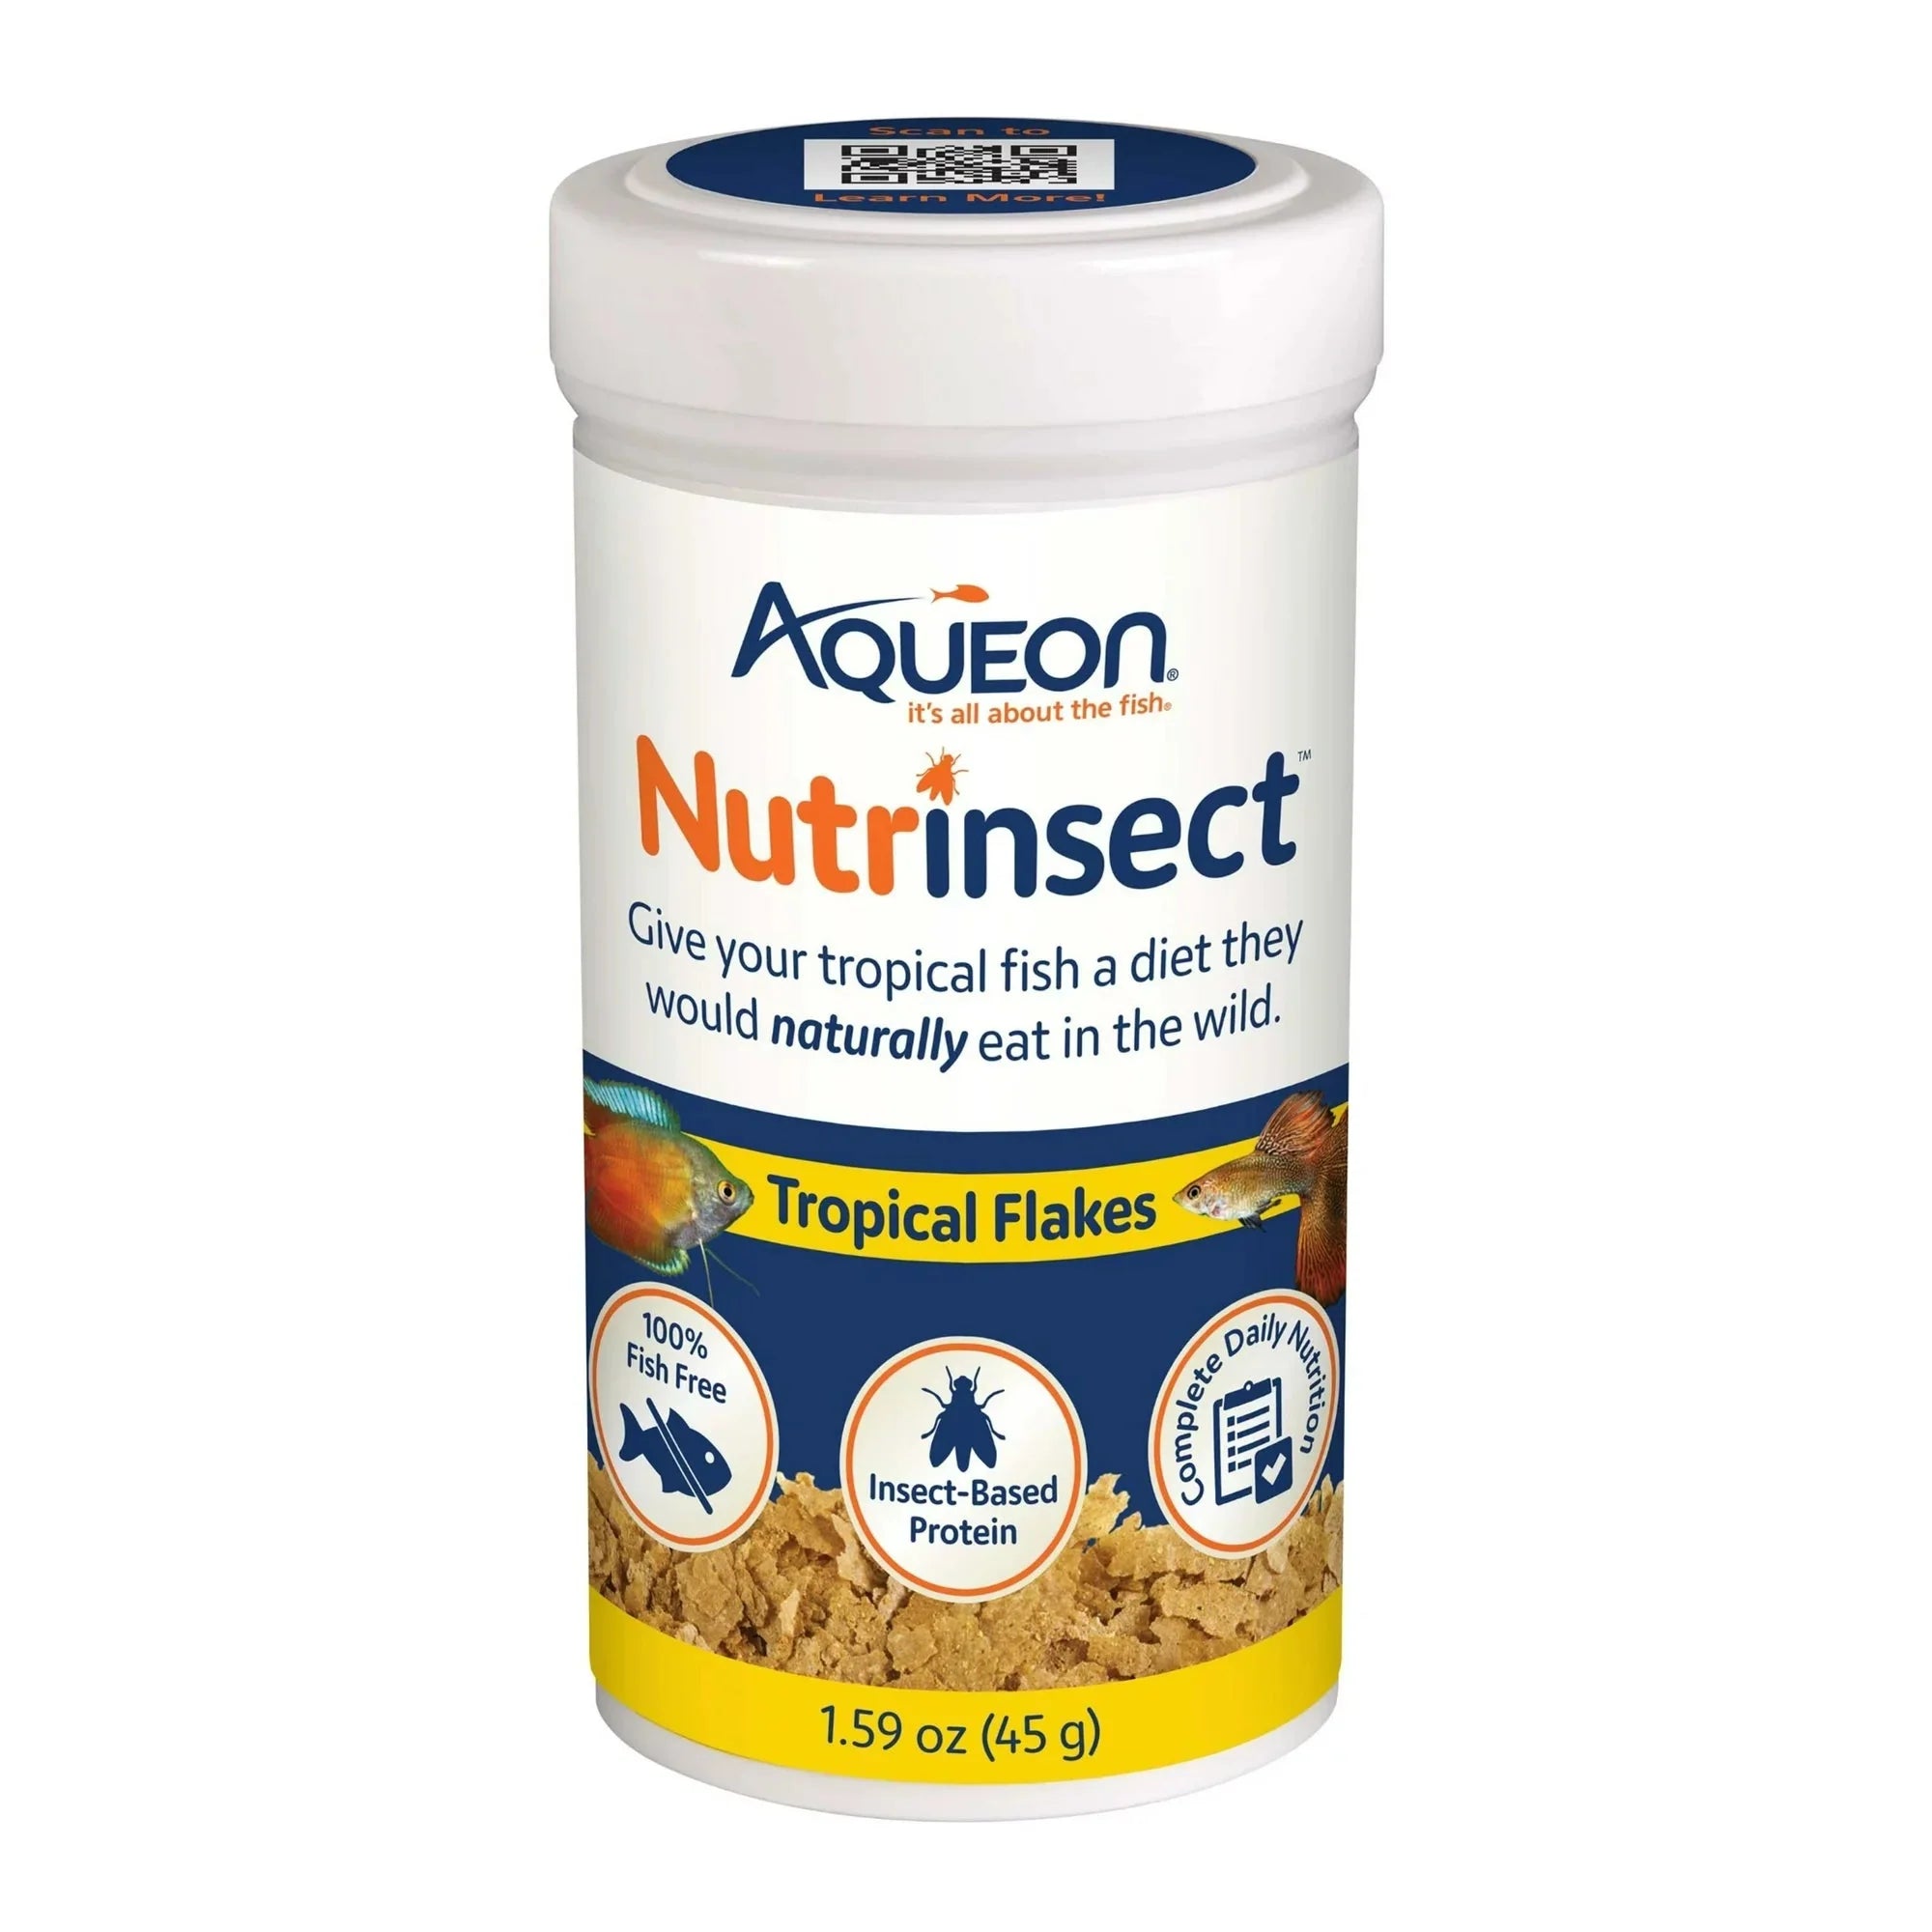 Wholesale prices with free shipping all over United States Aqueon Nutrinsect Fish-Free Fish Food Tropical Flakes 1.59 oz - Steven Deals